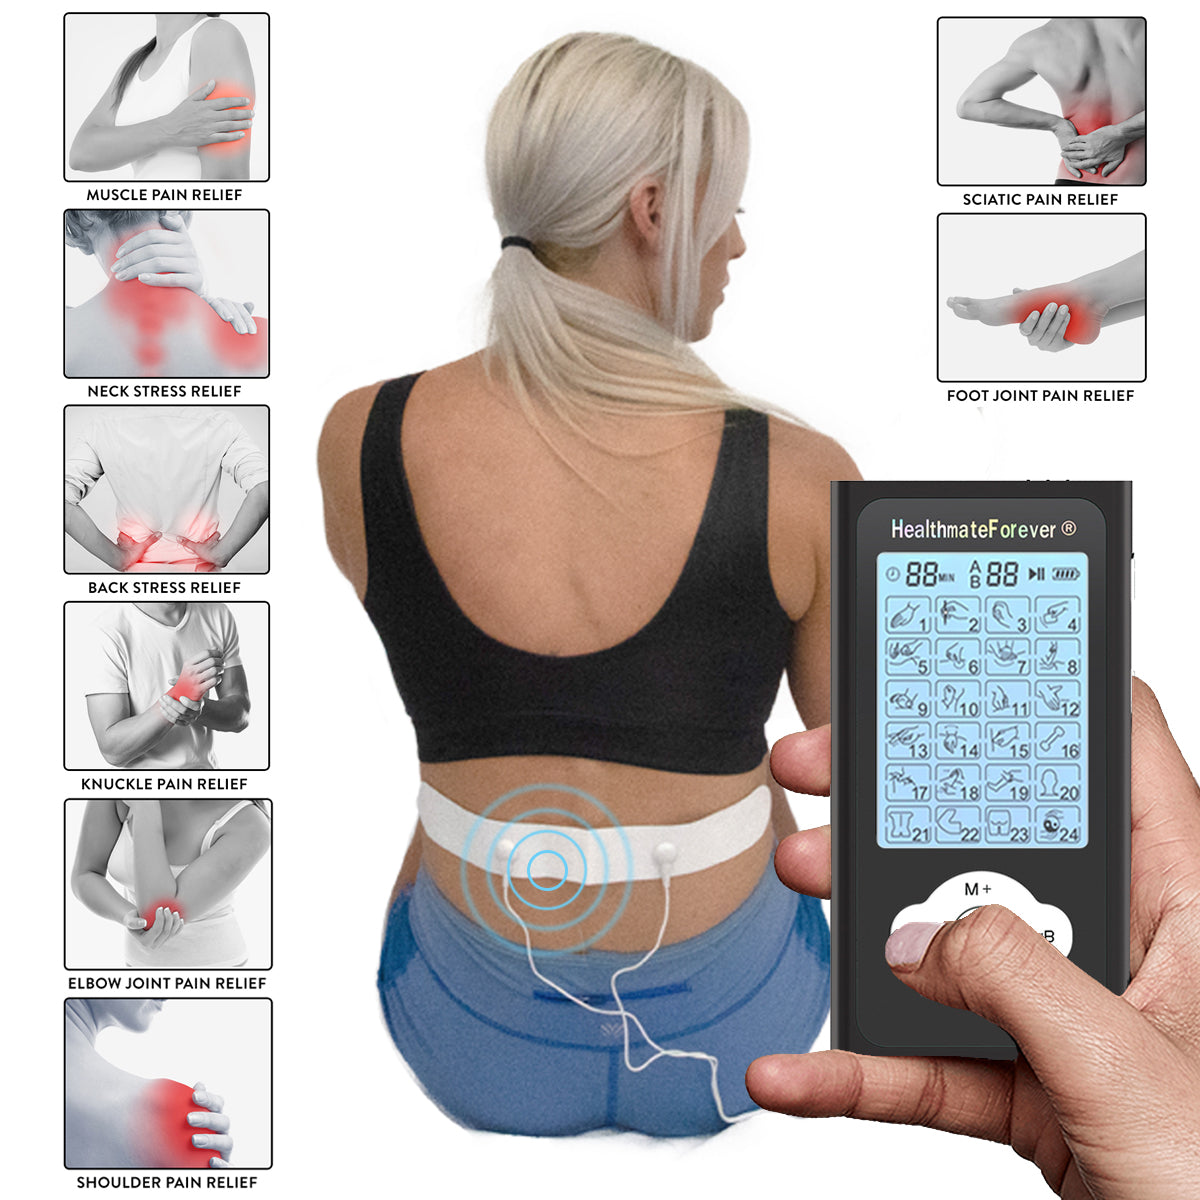 TENS 7000 Digital Back Pain Relief System Unit For Muscle & Joint